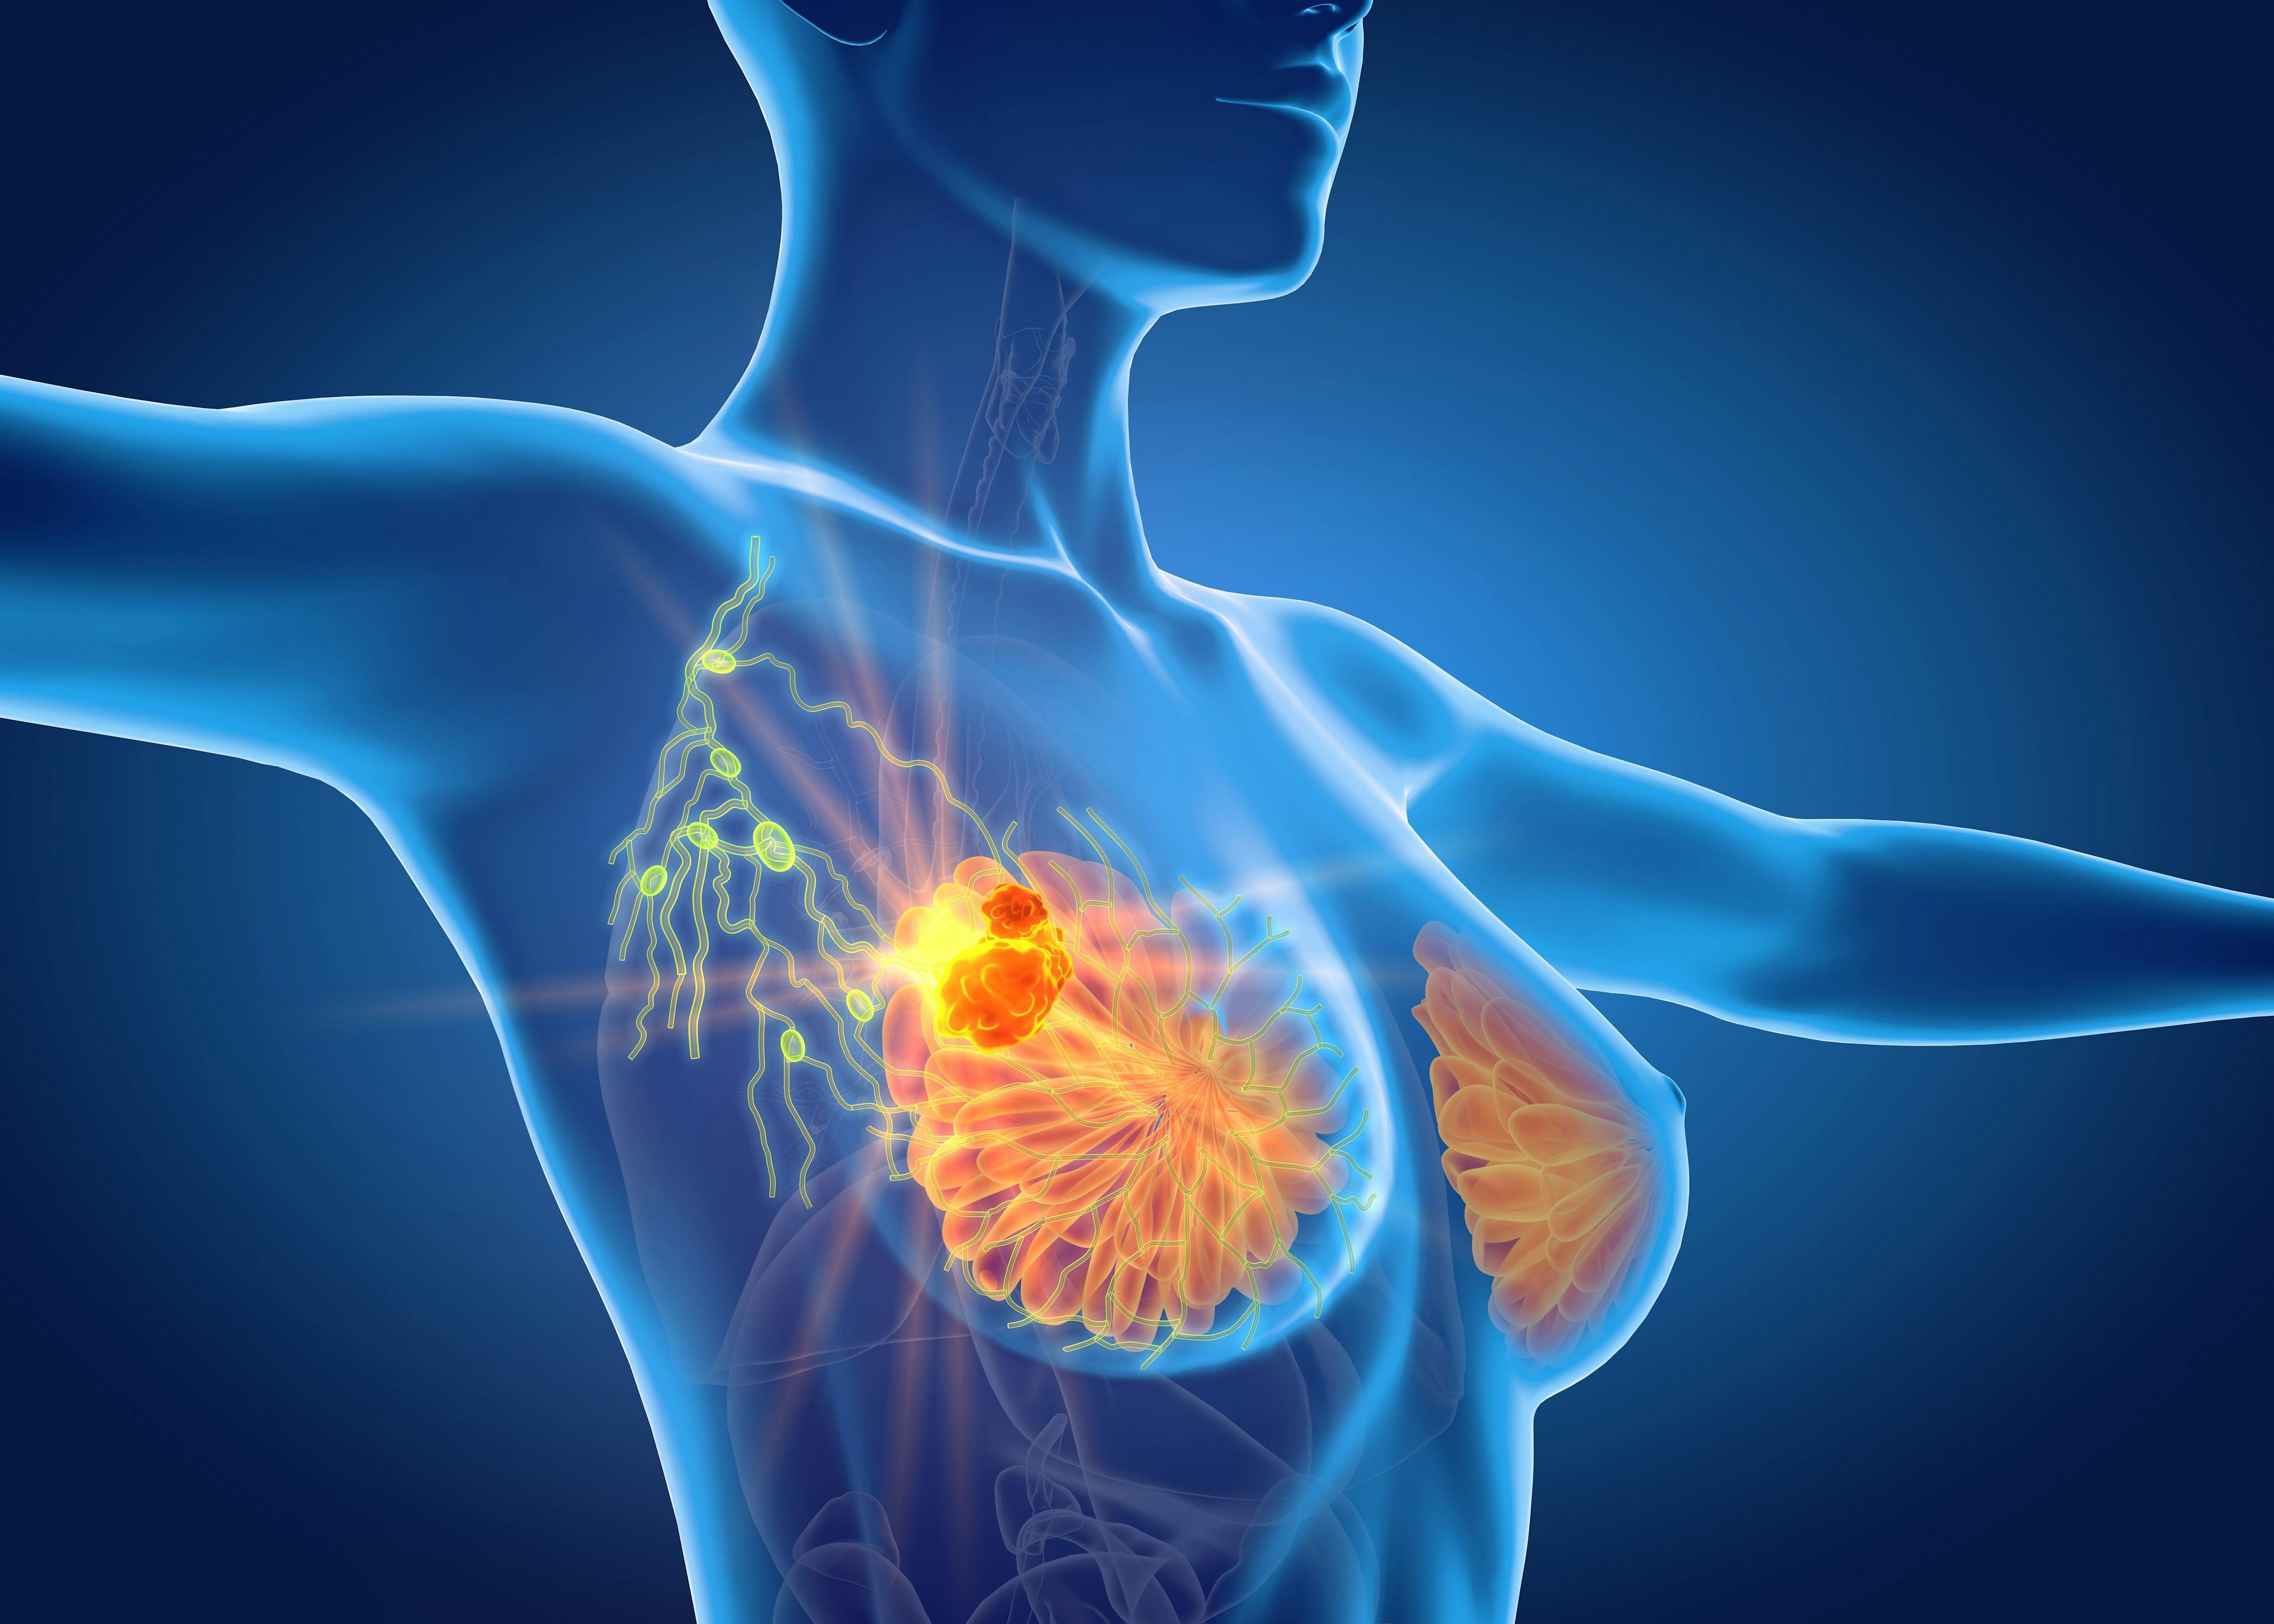 Breast cancer with lymphatics | Image Credit: Axel Kock - stock.adobe.com